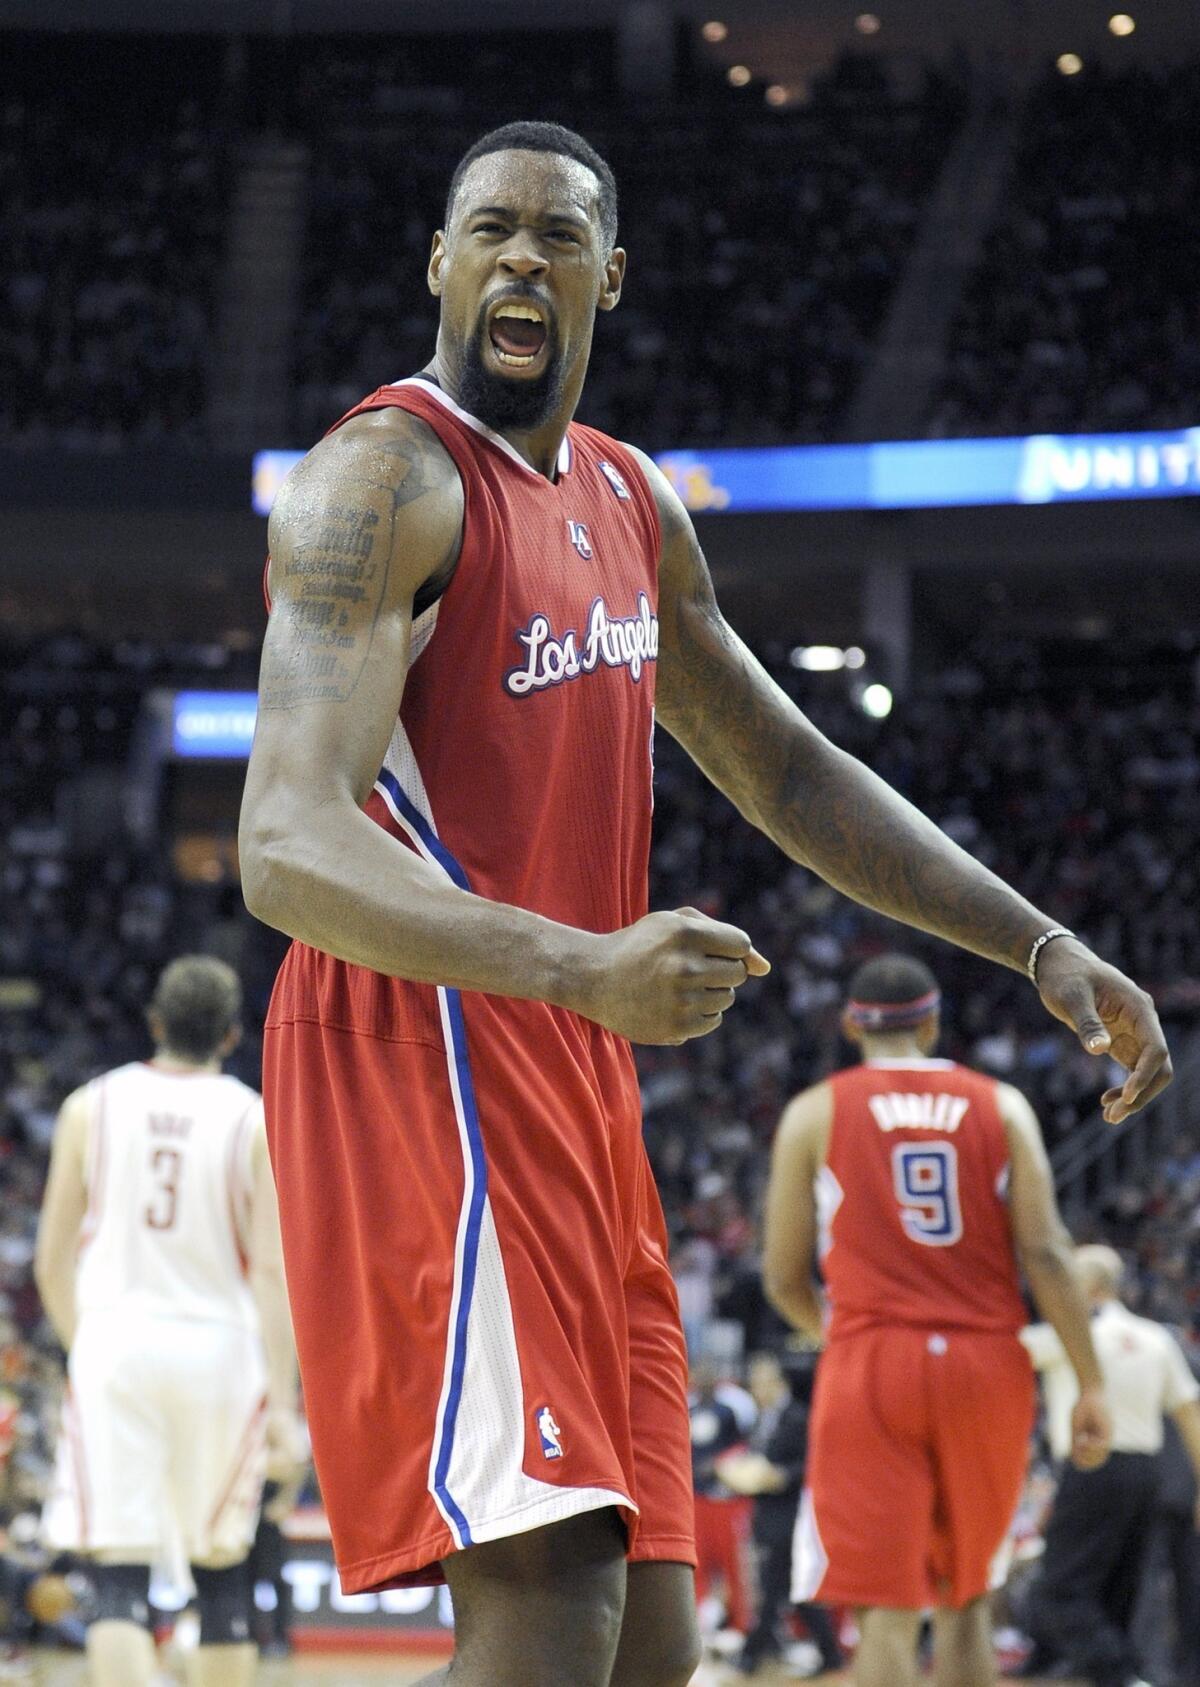 Clippers center DeAndre Jordan reacts after blocking a shot during Saturday's win over the Houston Rockets. Jordan has recorded 51 rebounds over the last three games.